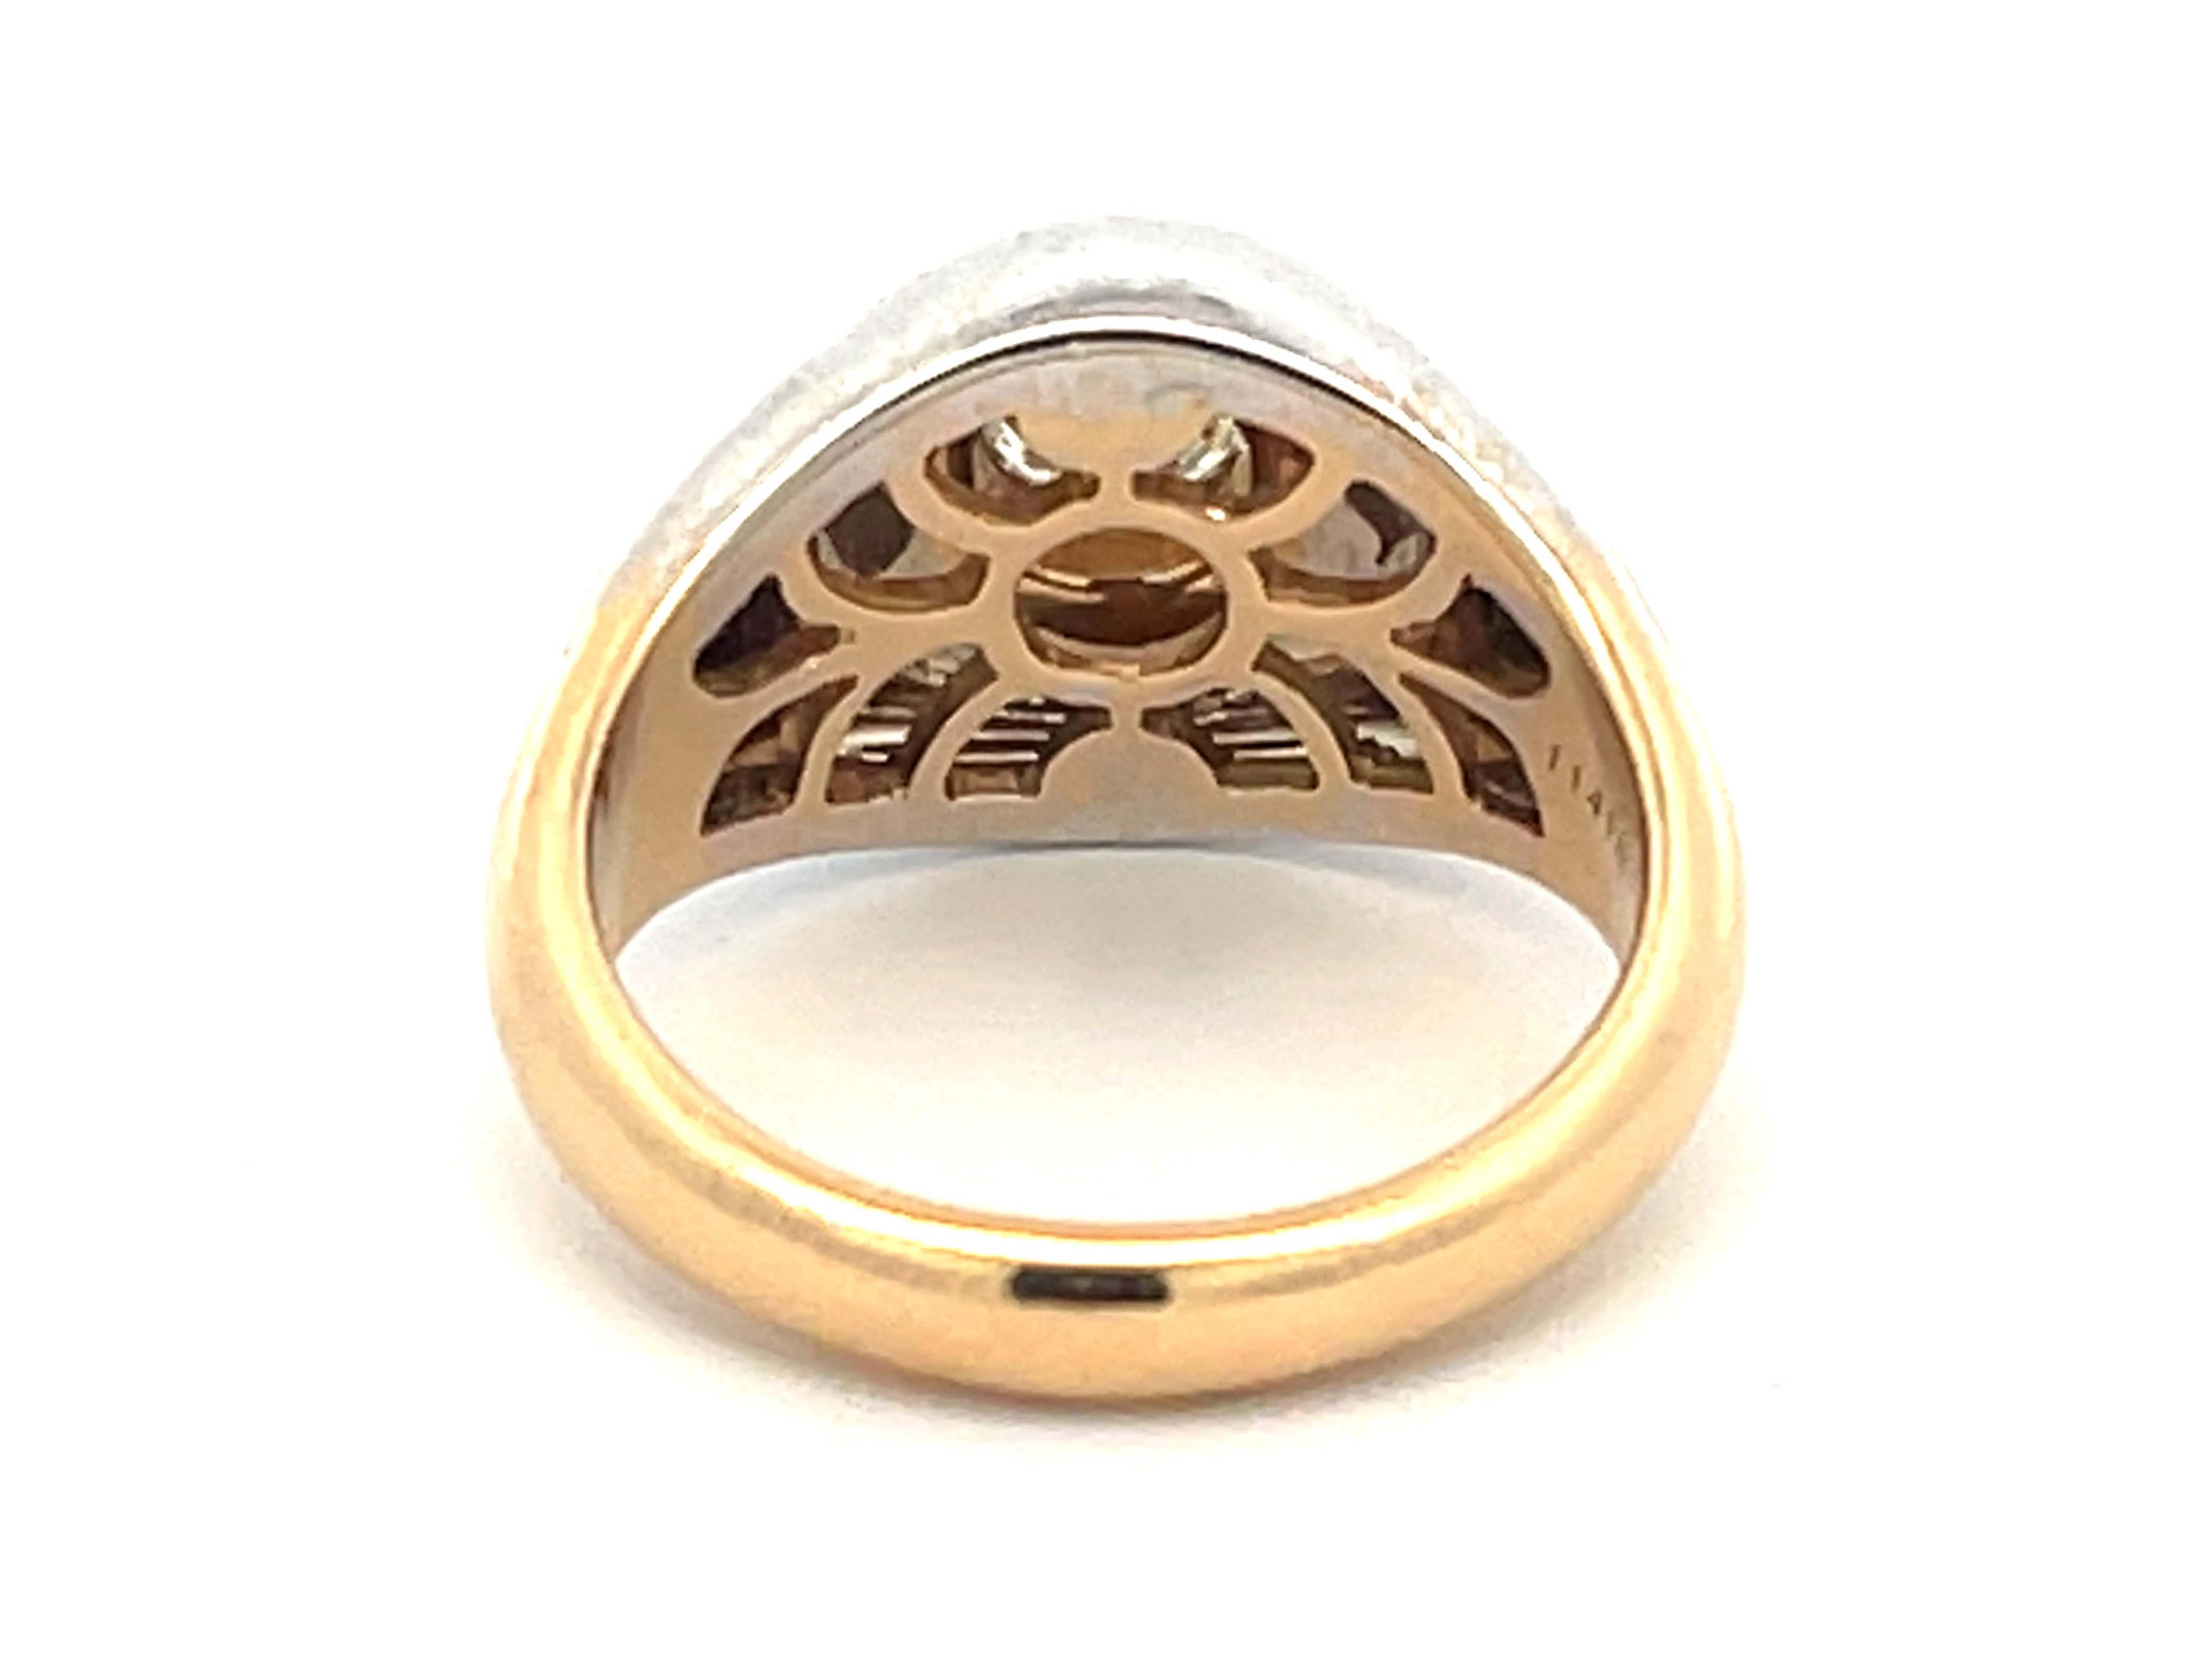 Bvlgari Bvlgari Diamond Ring in 18k White and Yellow Gold In Excellent Condition For Sale In Honolulu, HI